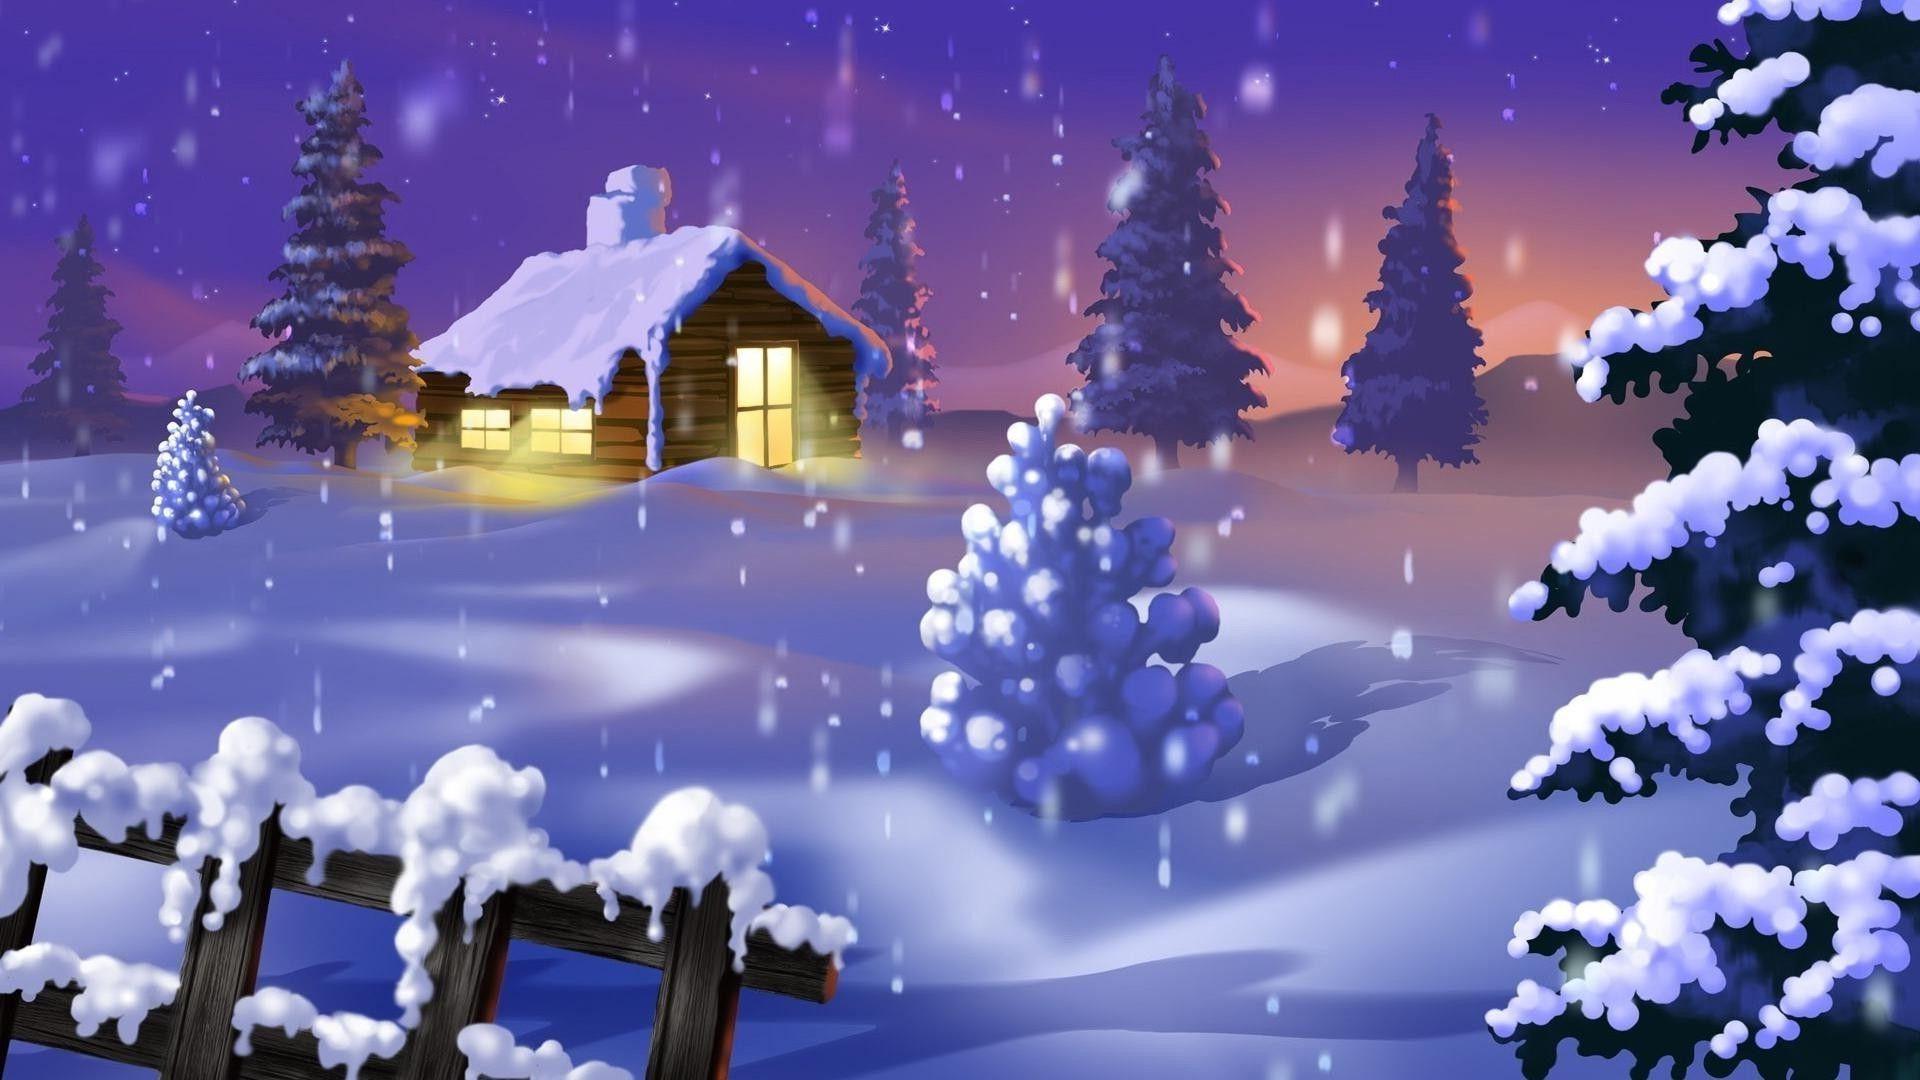 Snowfall, snow, night, house. Android wallpaper for free